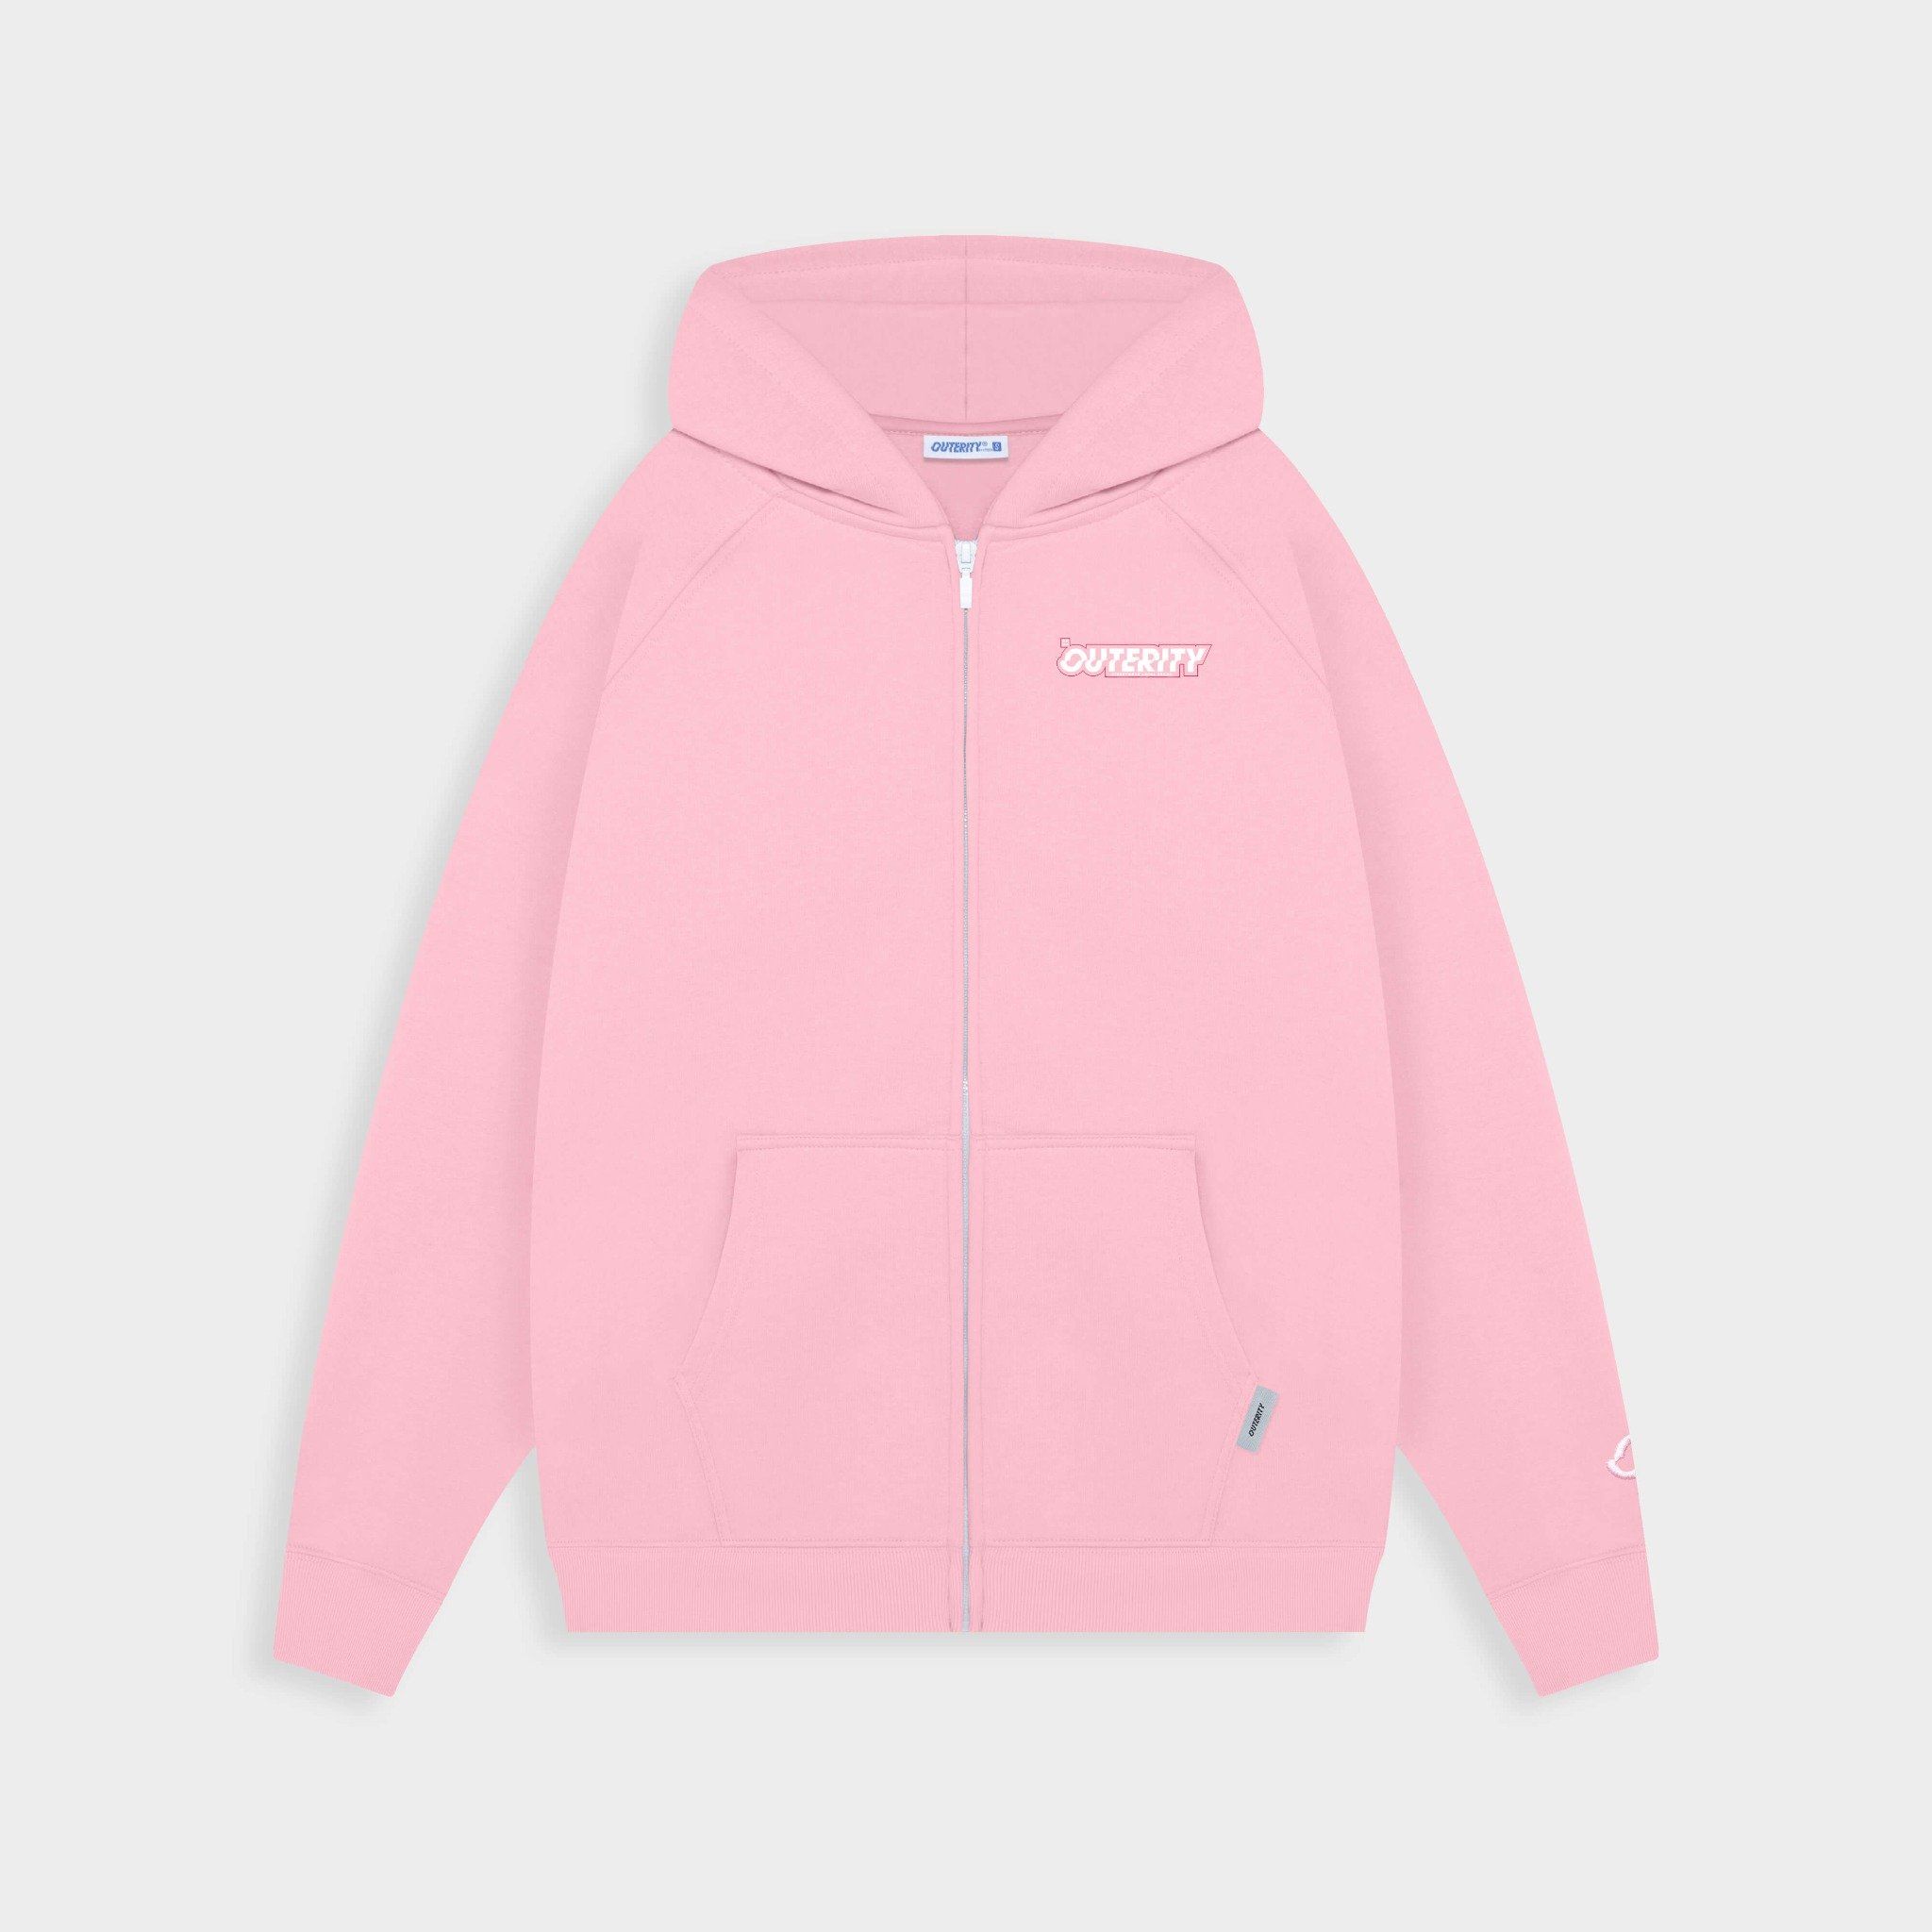 HOODIE ZIP SIGNATURE / PINK PASTEL COLOR – Outerity